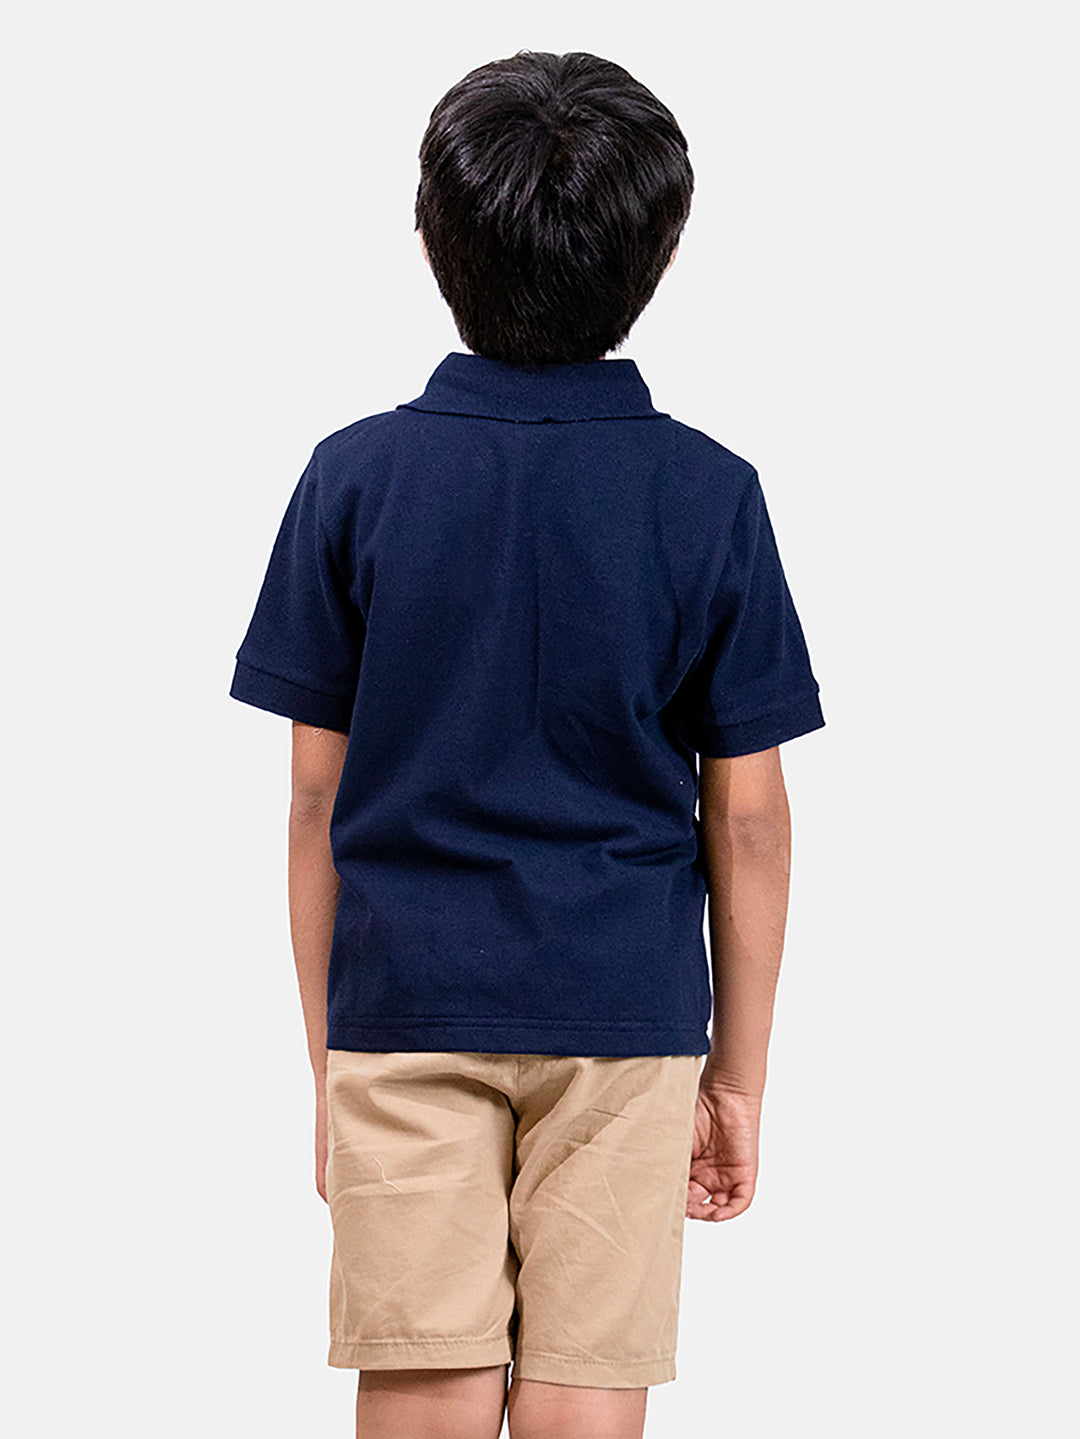 Navy Blue Embroidered Polo T-shirt